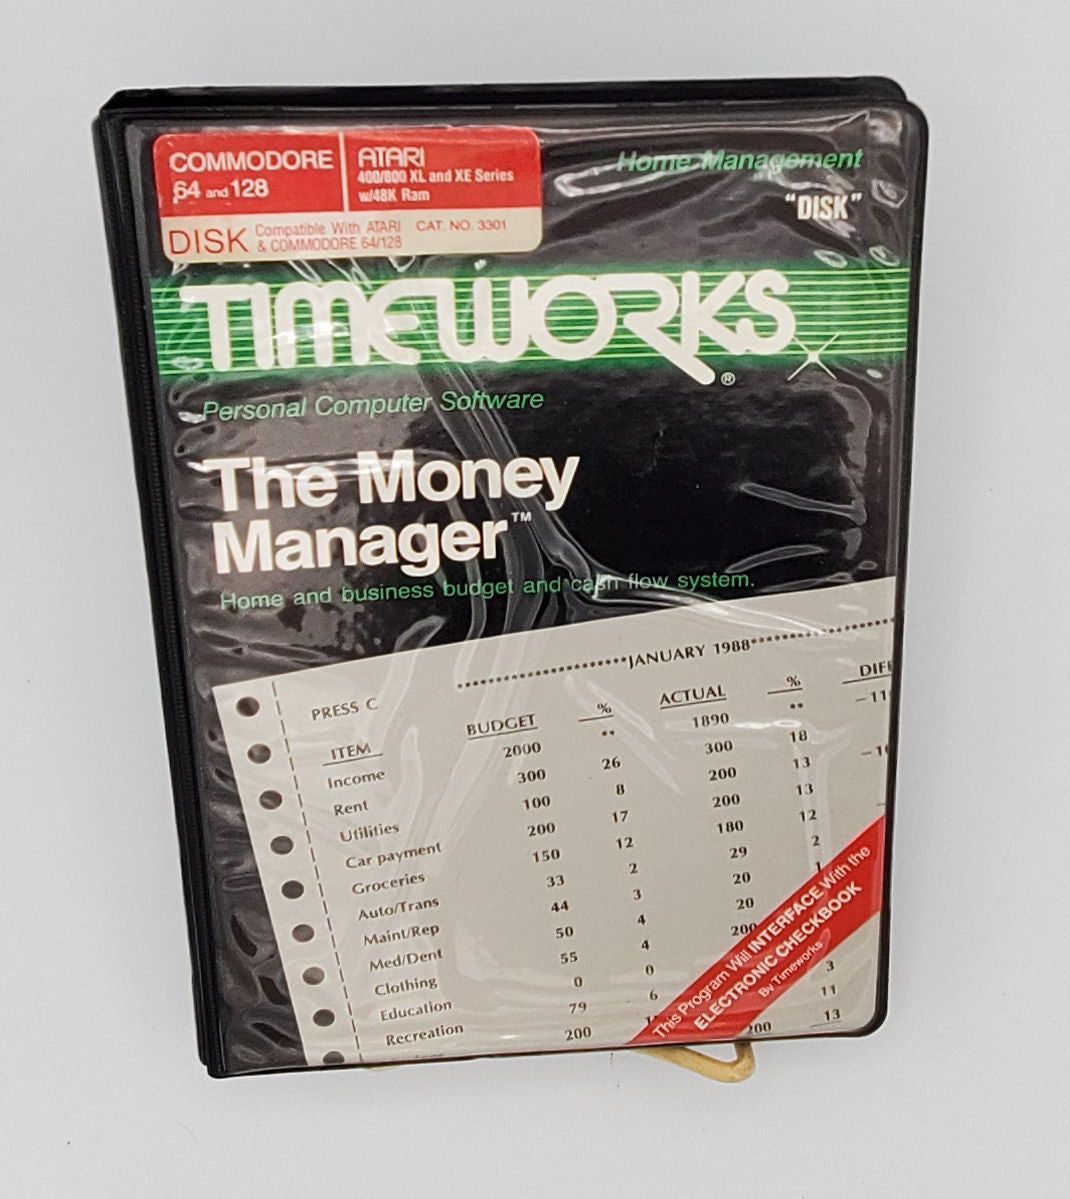 The Money Manager by Timeworks